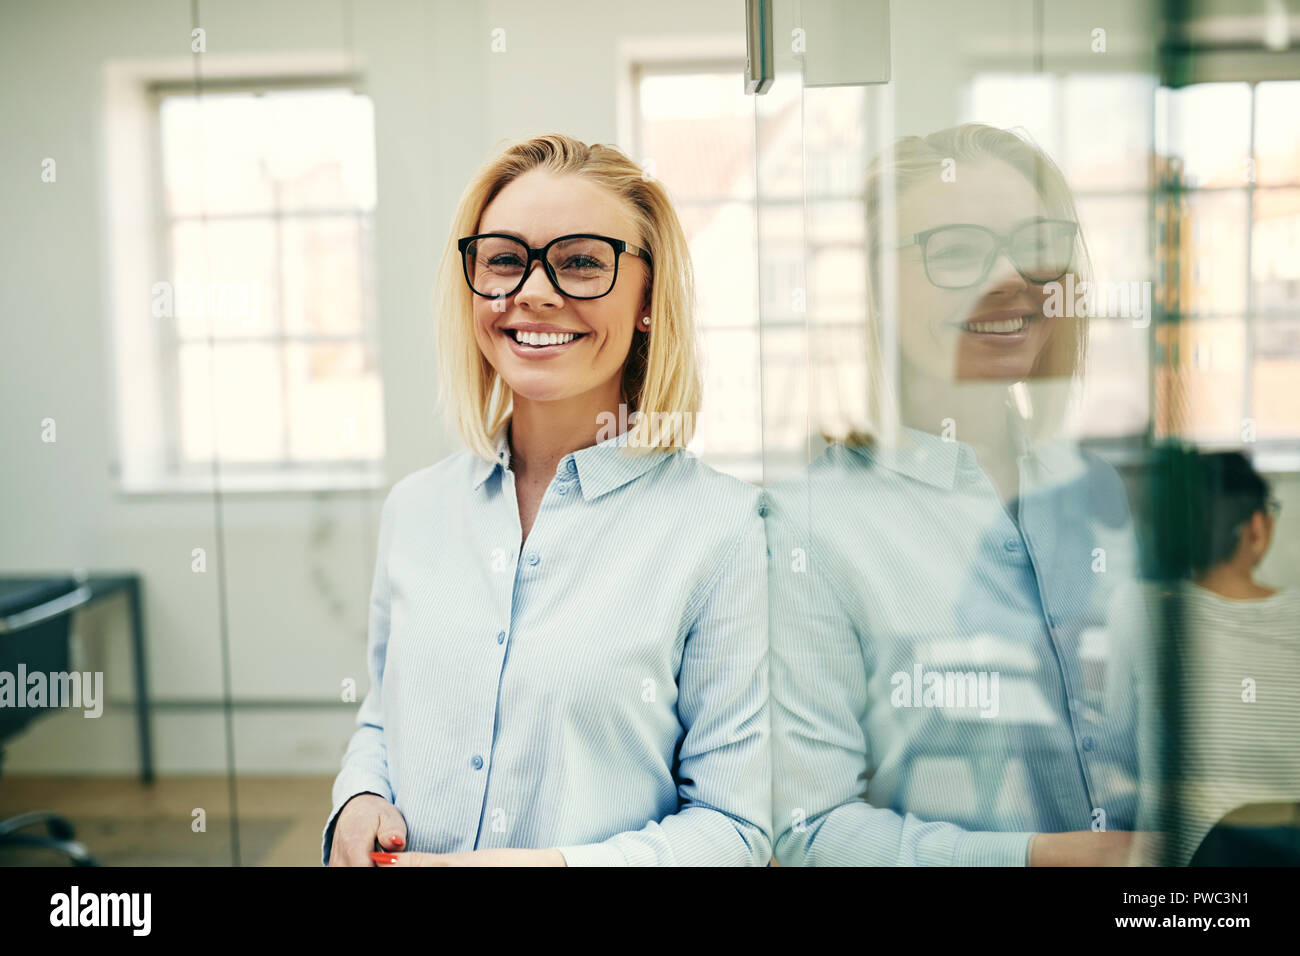 Young businesswoman smiling confidently while leaning against a glass wall in an office with colleagues in the background Stock Photo